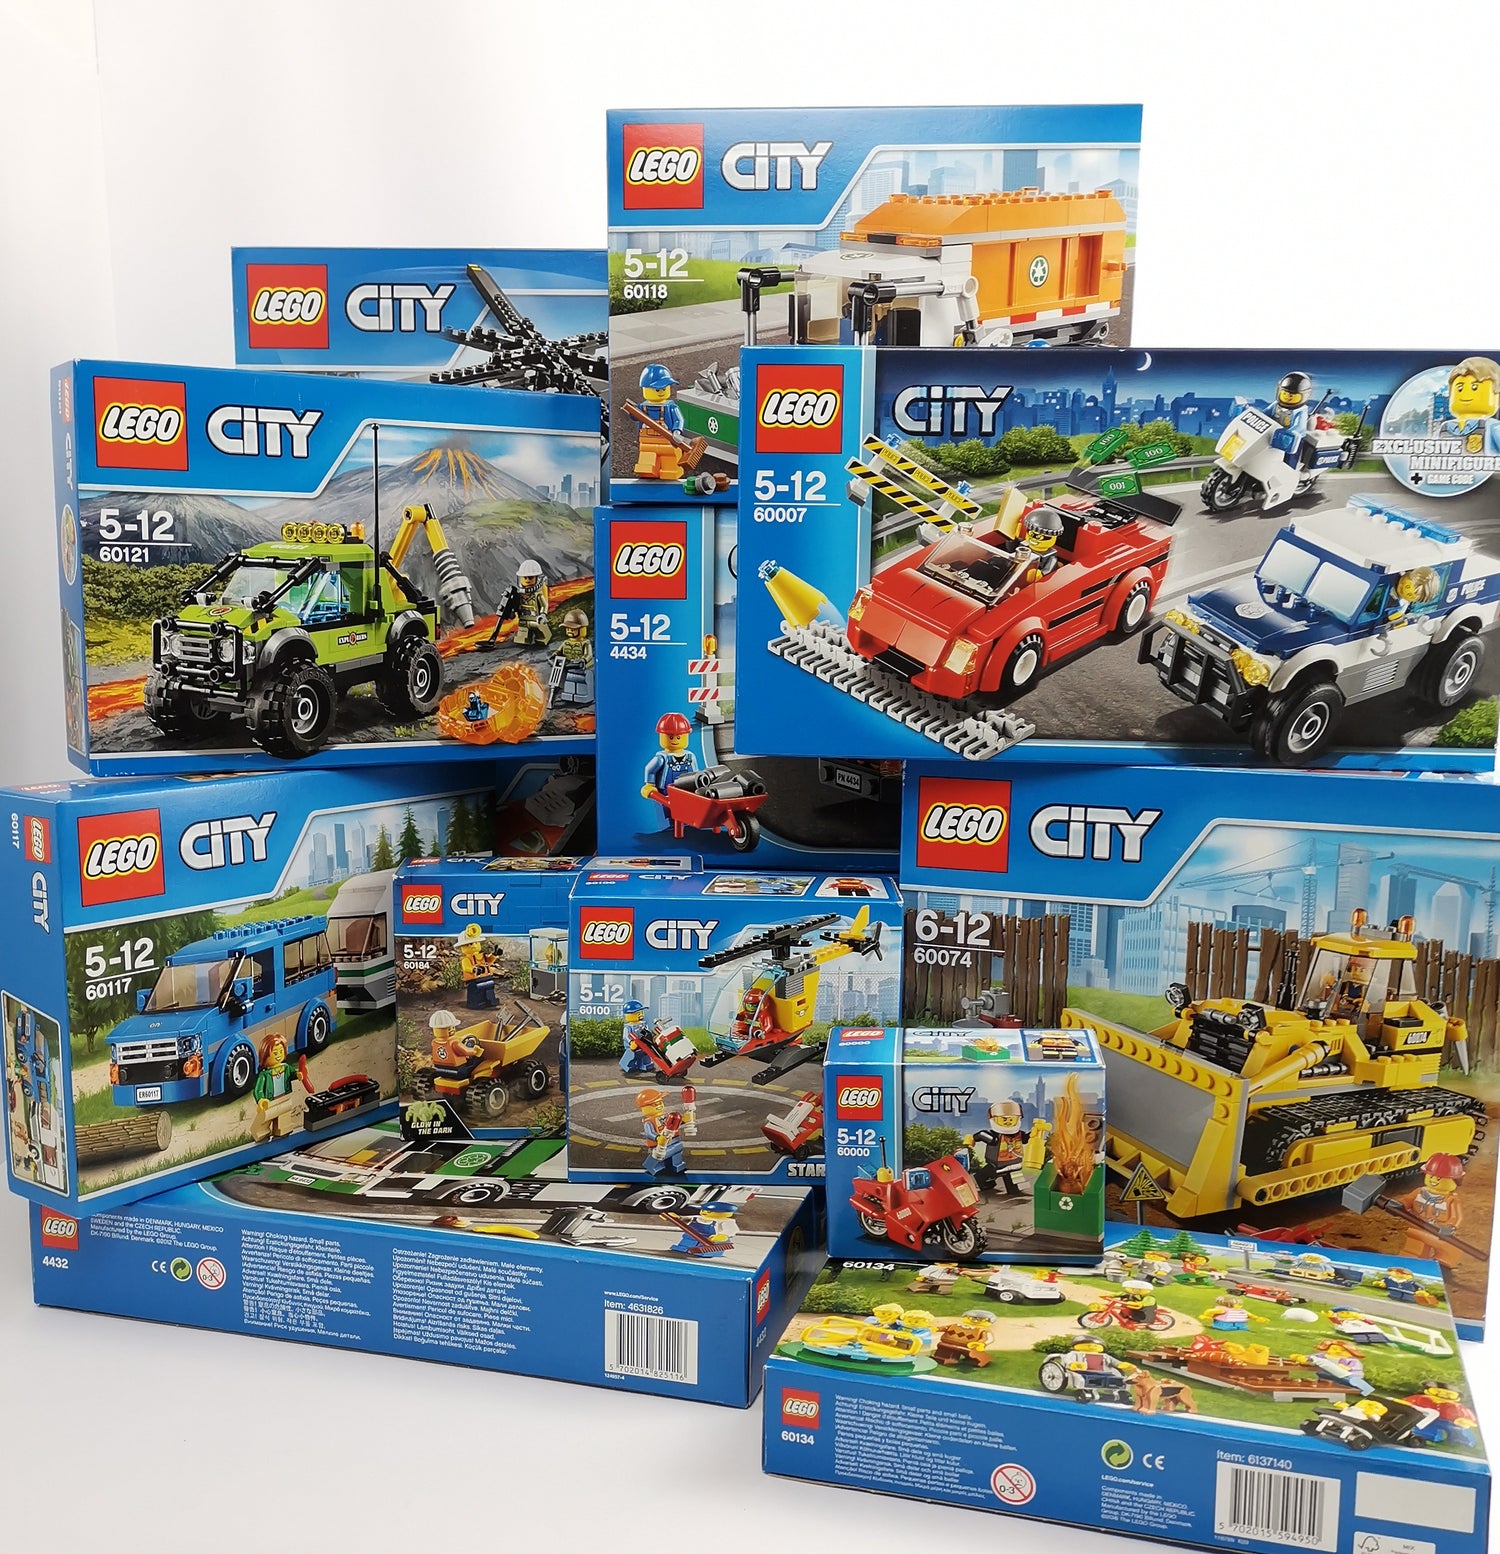 14 Lego City sets: garbage truck, excavator, helicopter and more | Original packaging NEW NEW